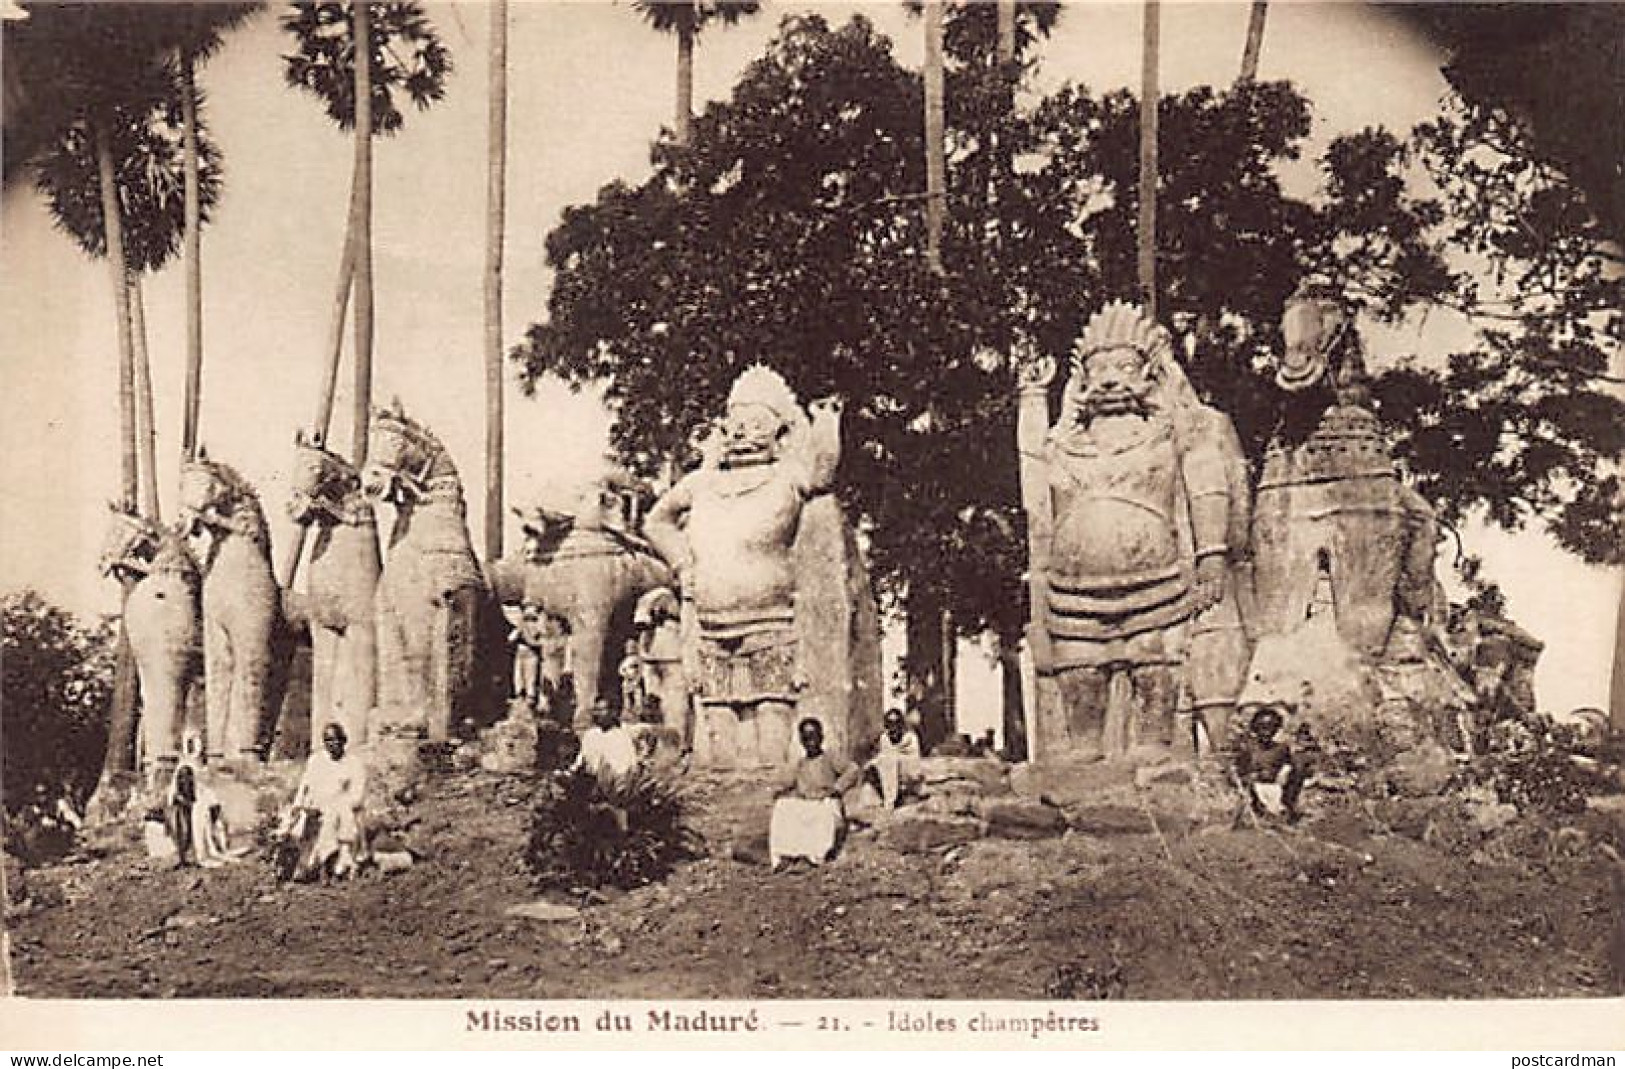 India - MADURAI - Indian Idols In The Countryside - Publ. Mission Jésuite Du Maduré - Inde